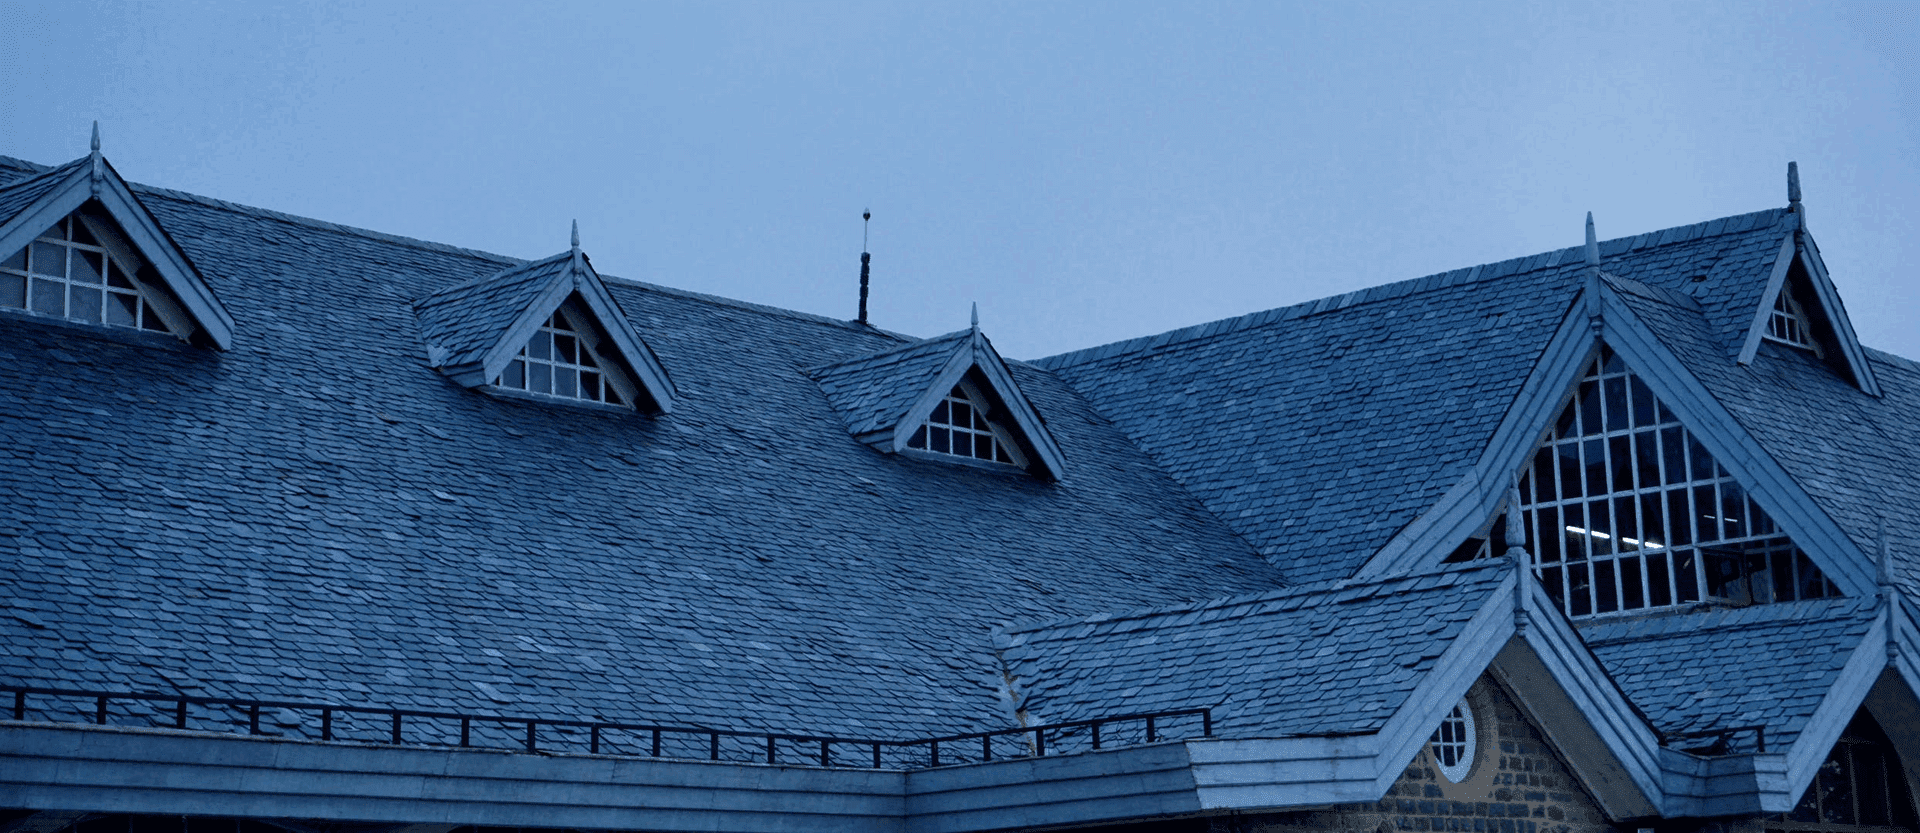 Photo of a large roof with shingles and gutter guards, taken at twilight